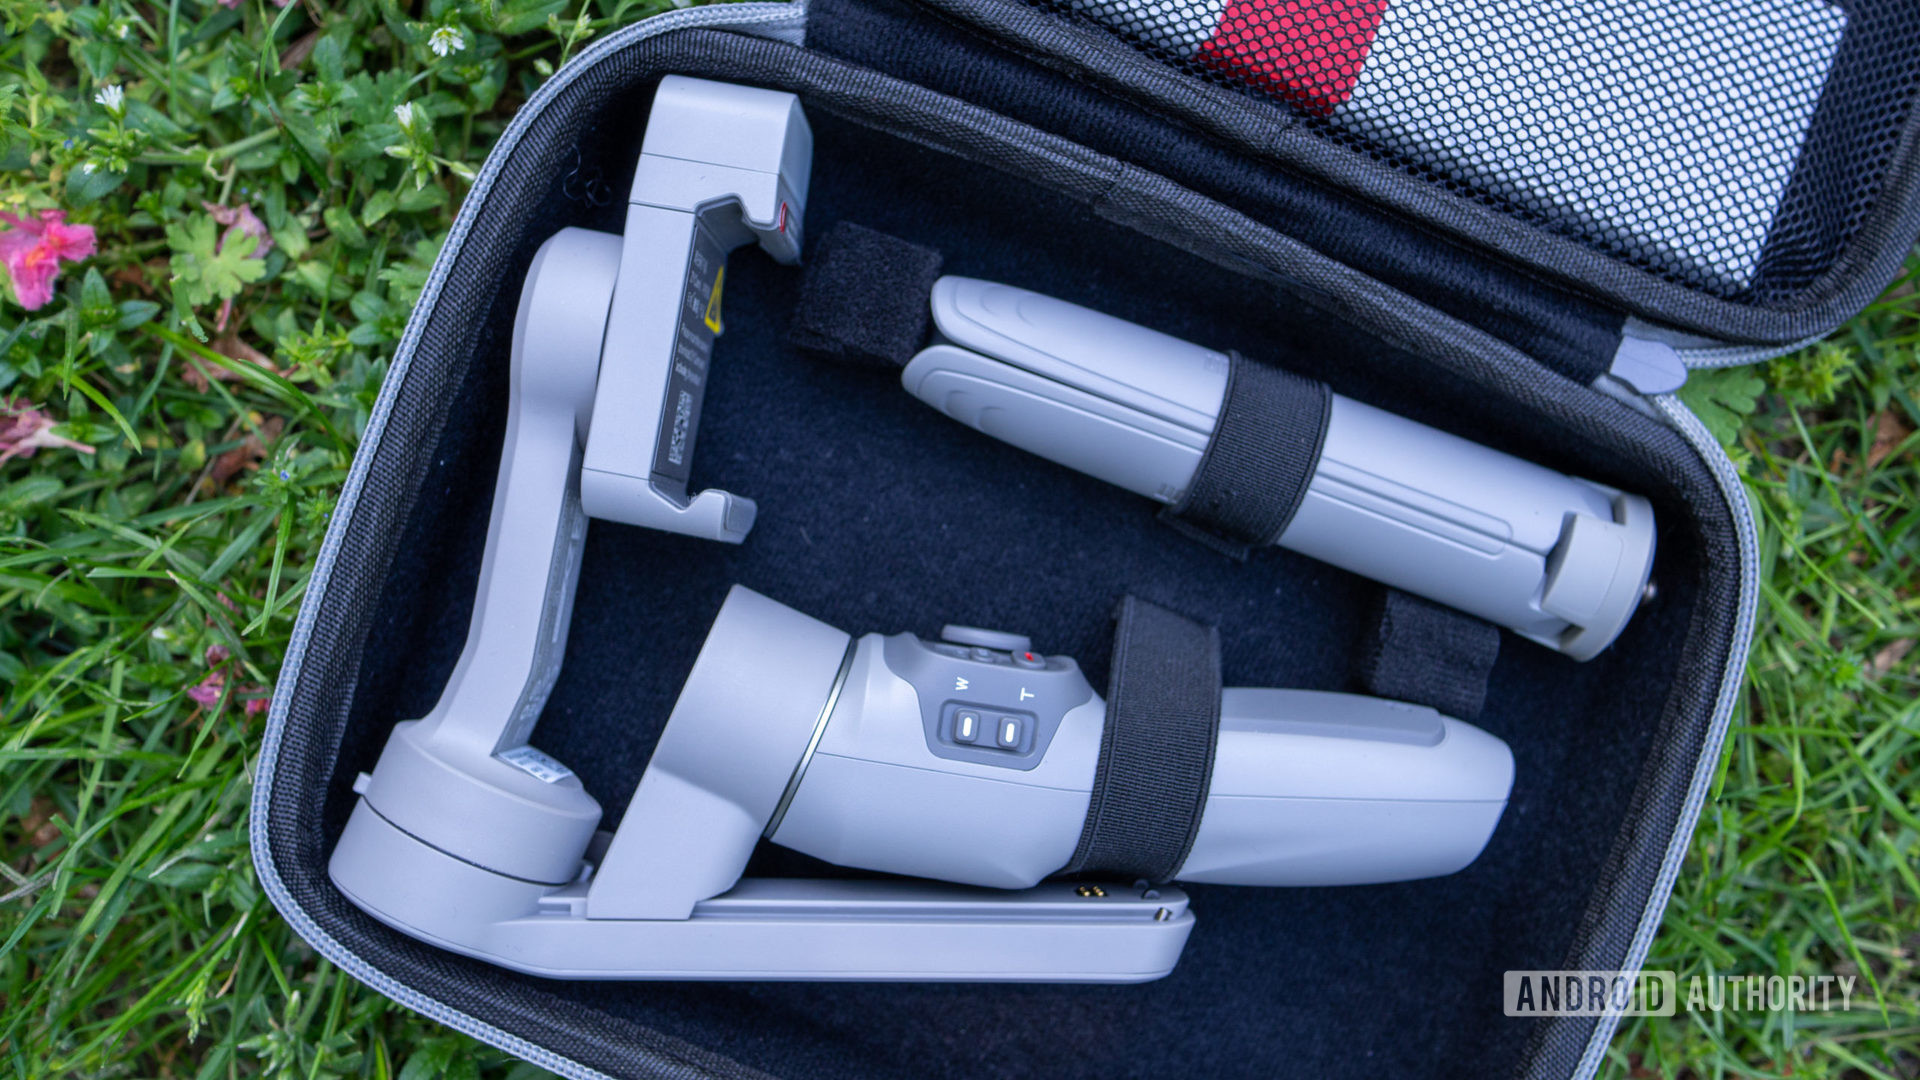 The Zhiyun Smooth-Q3 in carrying case with tripod.